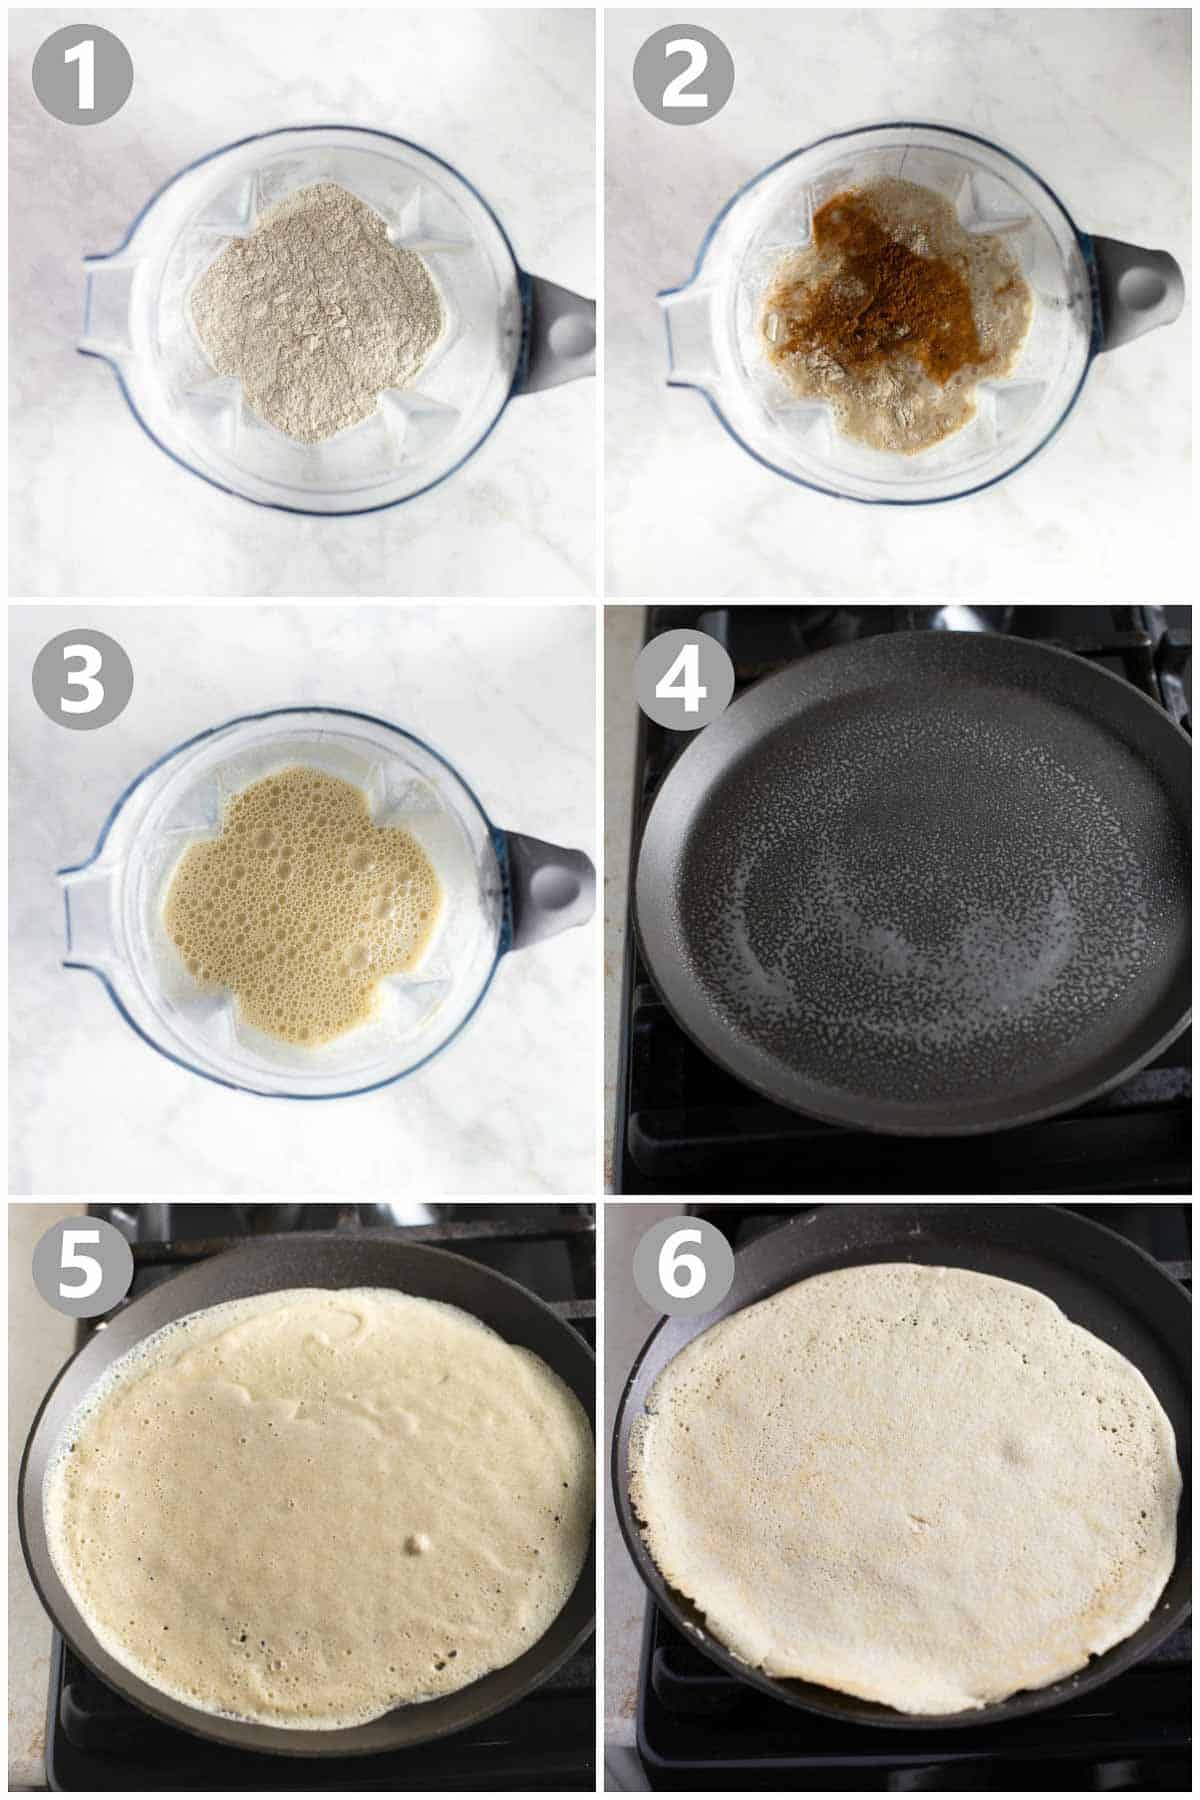 step-by-step instructions for how to make buckwheat crepes